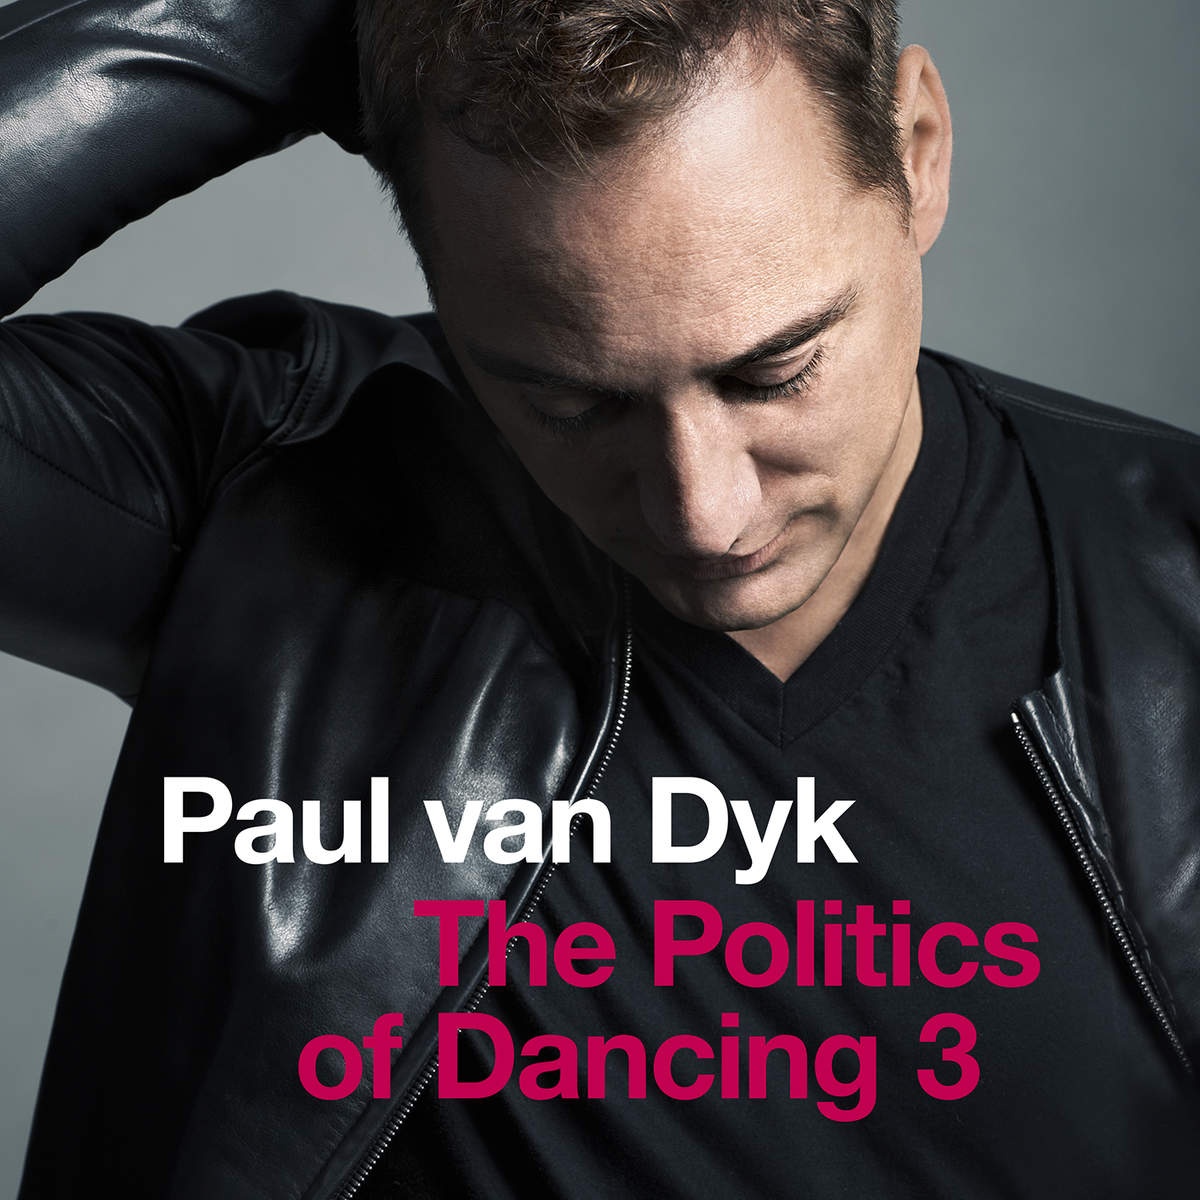 Come With Me (We Are One) [Paul van Dyk Festival Mix]